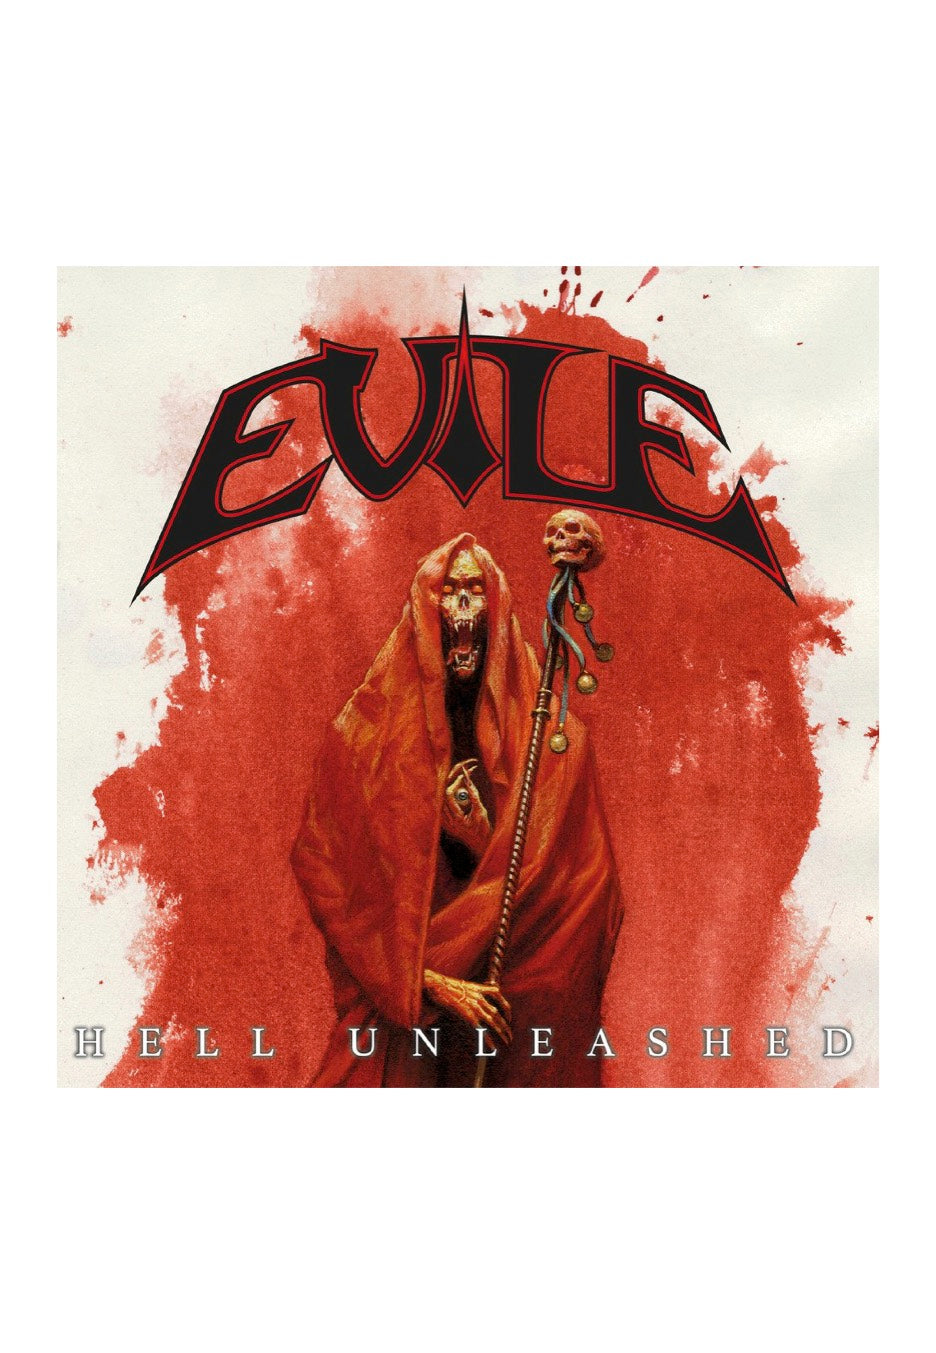 Evile - Hell Unleashed - CD